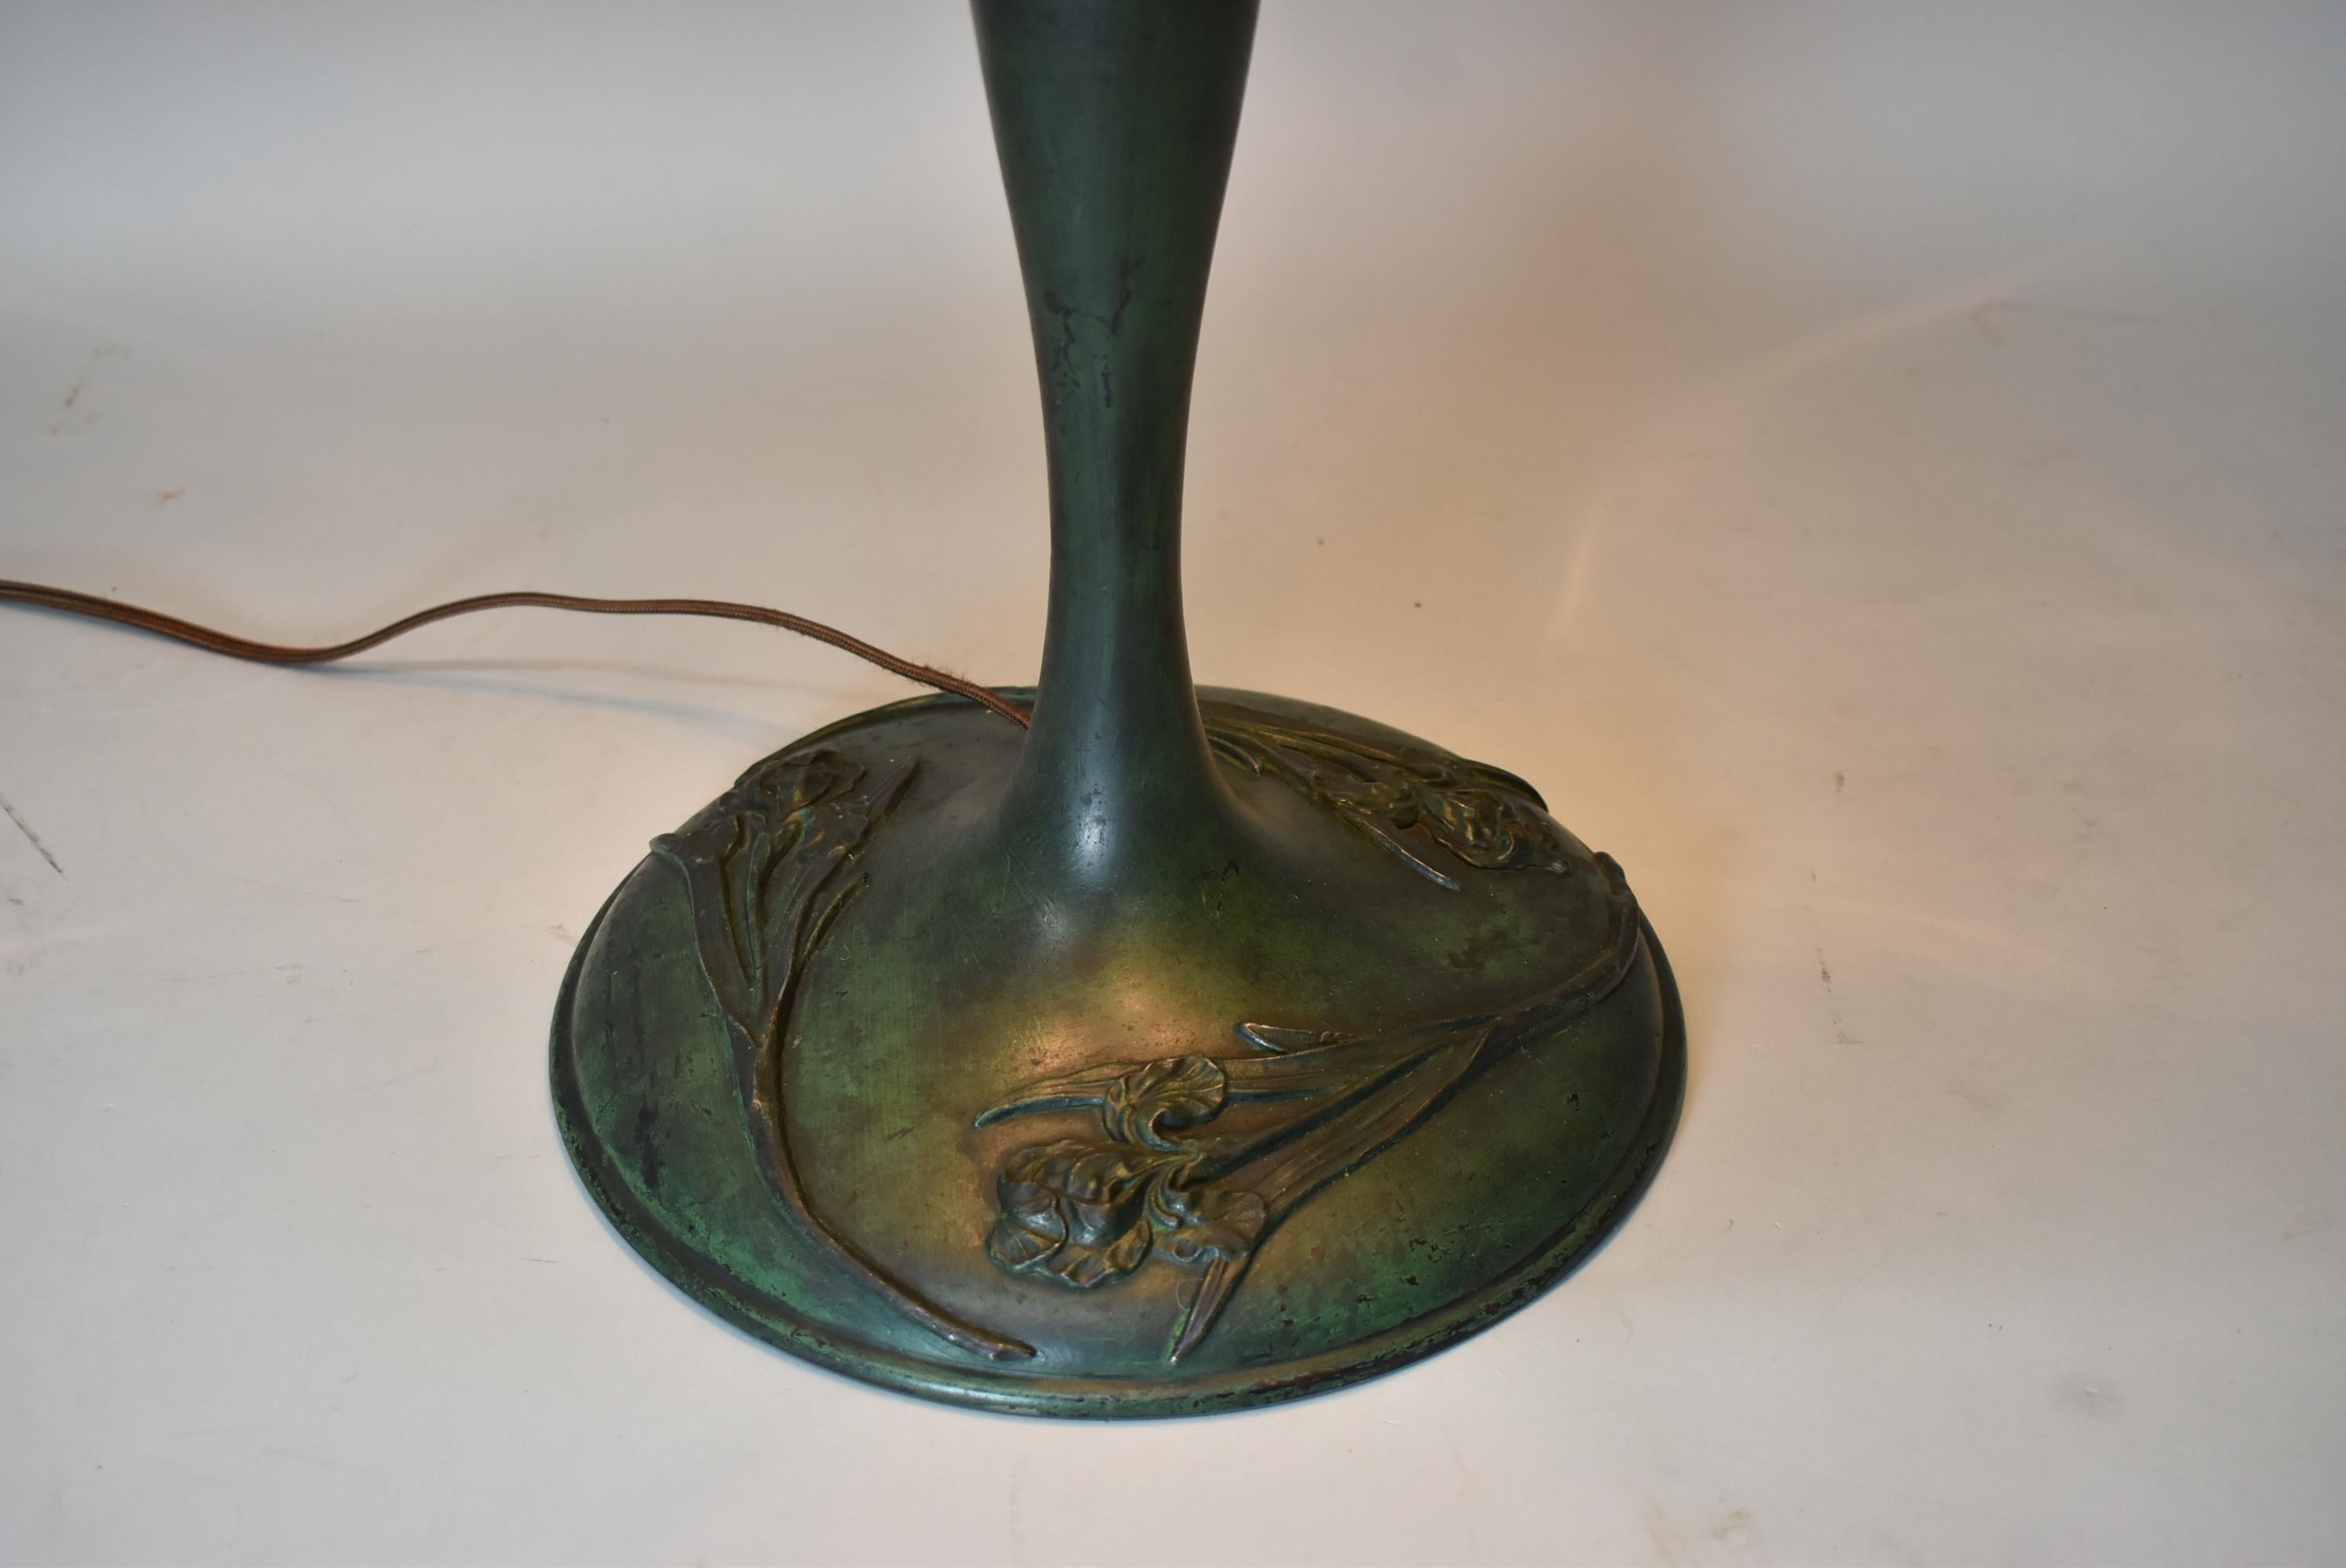 Antique Duffner & Kimberly leaded glass table lamp. Classic design with quality heavy granite back textured glass. Nice base having original green patina with applied iris flowers. Three sockets have ball pulls. Rewired with rayon cord and new plug.